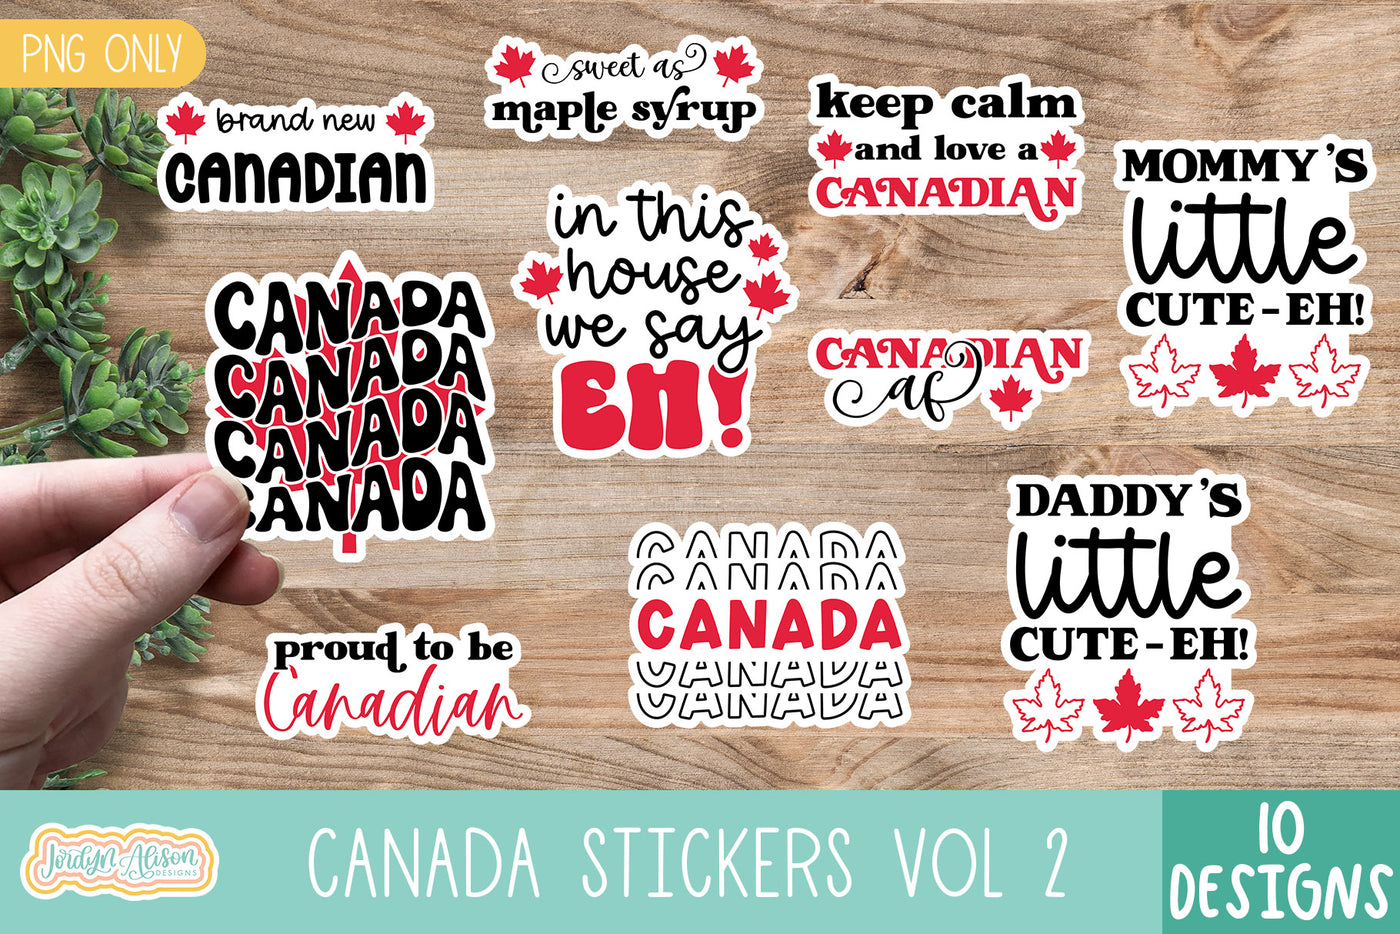 Canada PNG Stickers, Vol 2